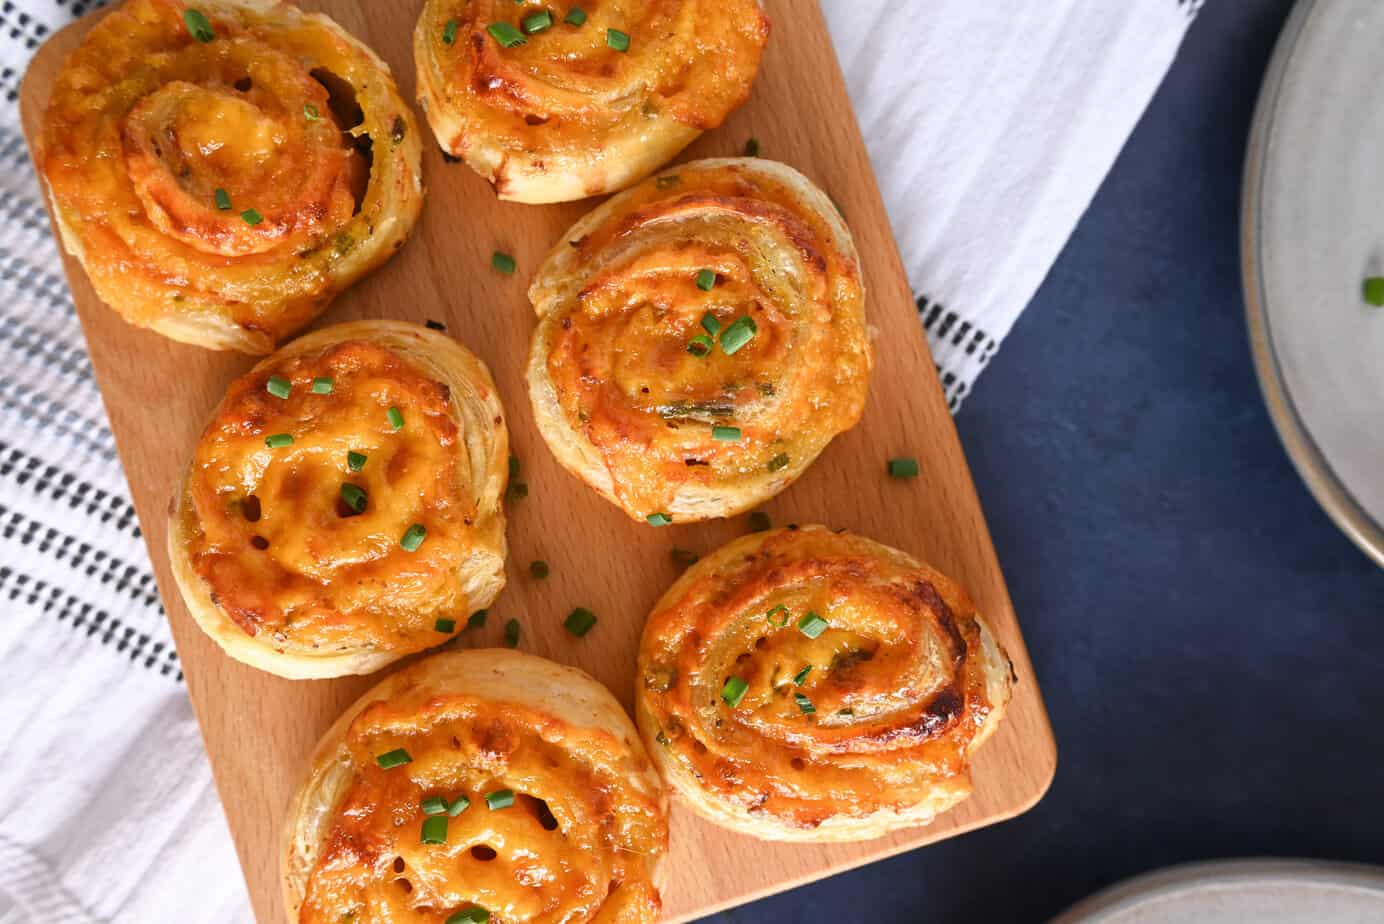 Six hot ham and cheese pinwheels on a wooden serving board.